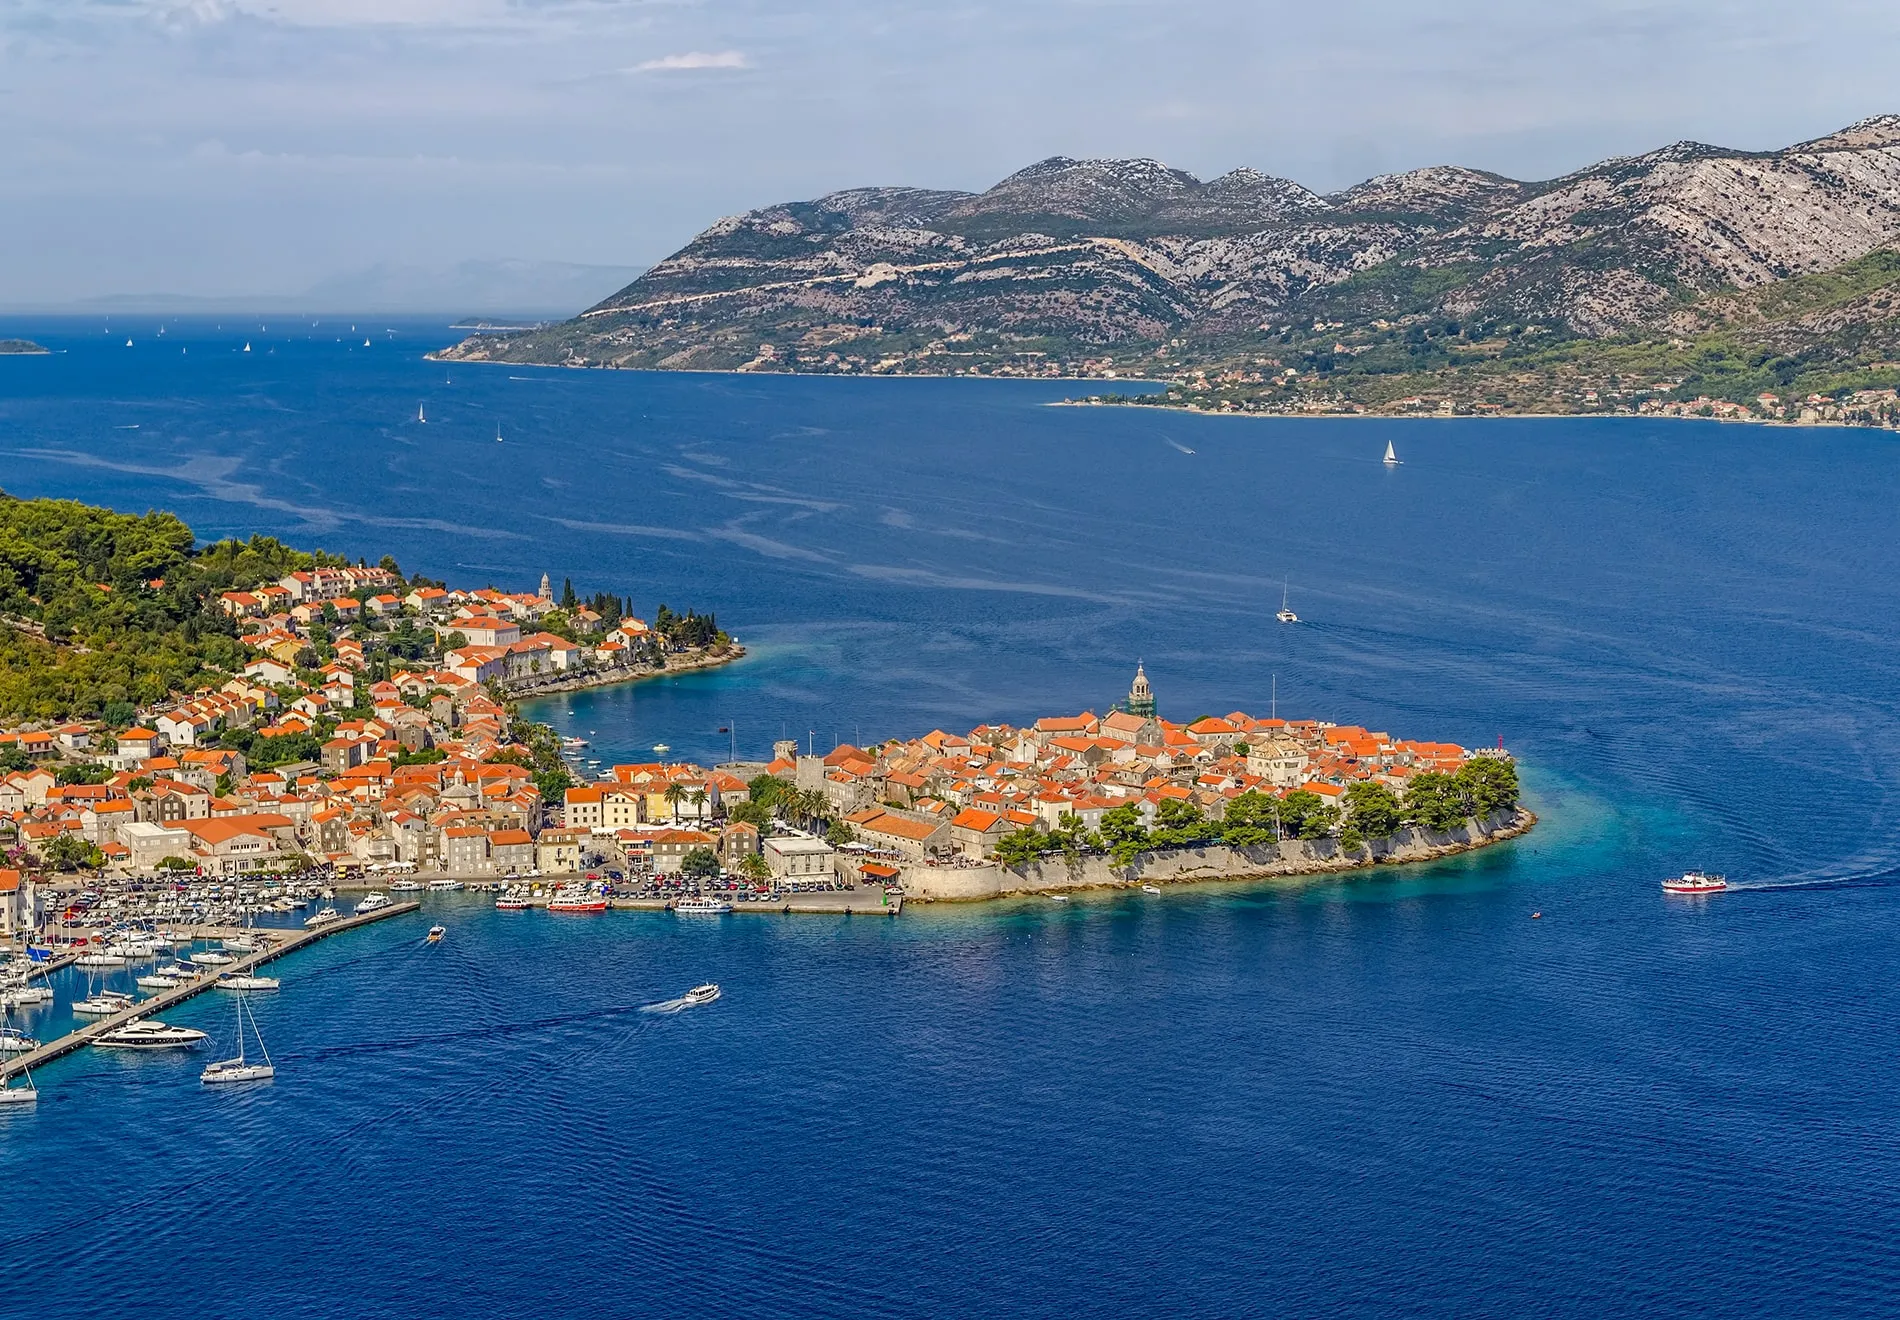 How flexible is the route for private charters Can guests request specific destinations or activities along the Croatian coa